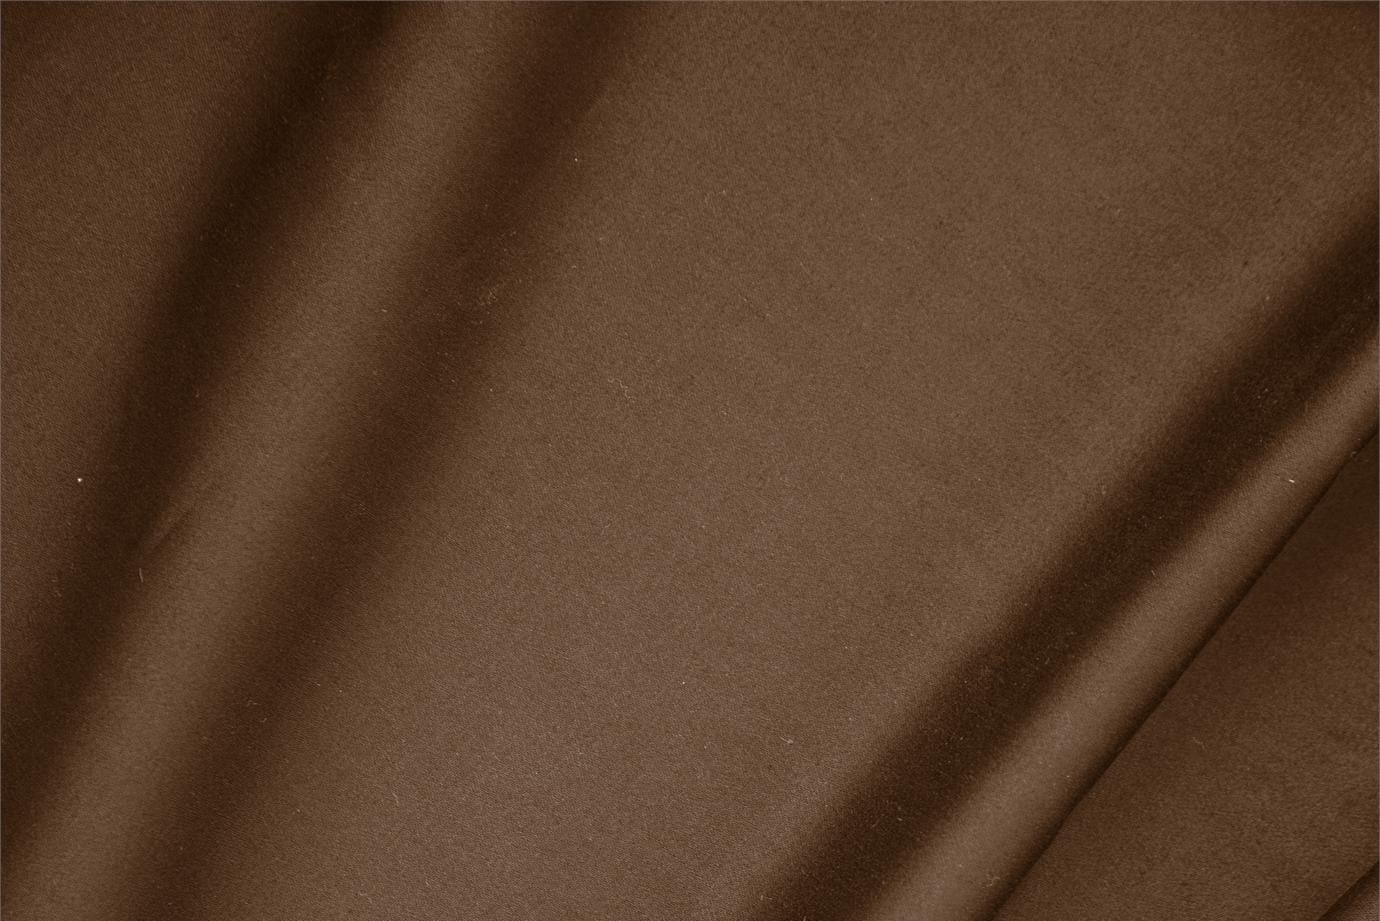 Cocoa Brown Cotton, Stretch Cotton sateen stretch fabric for dressmaking